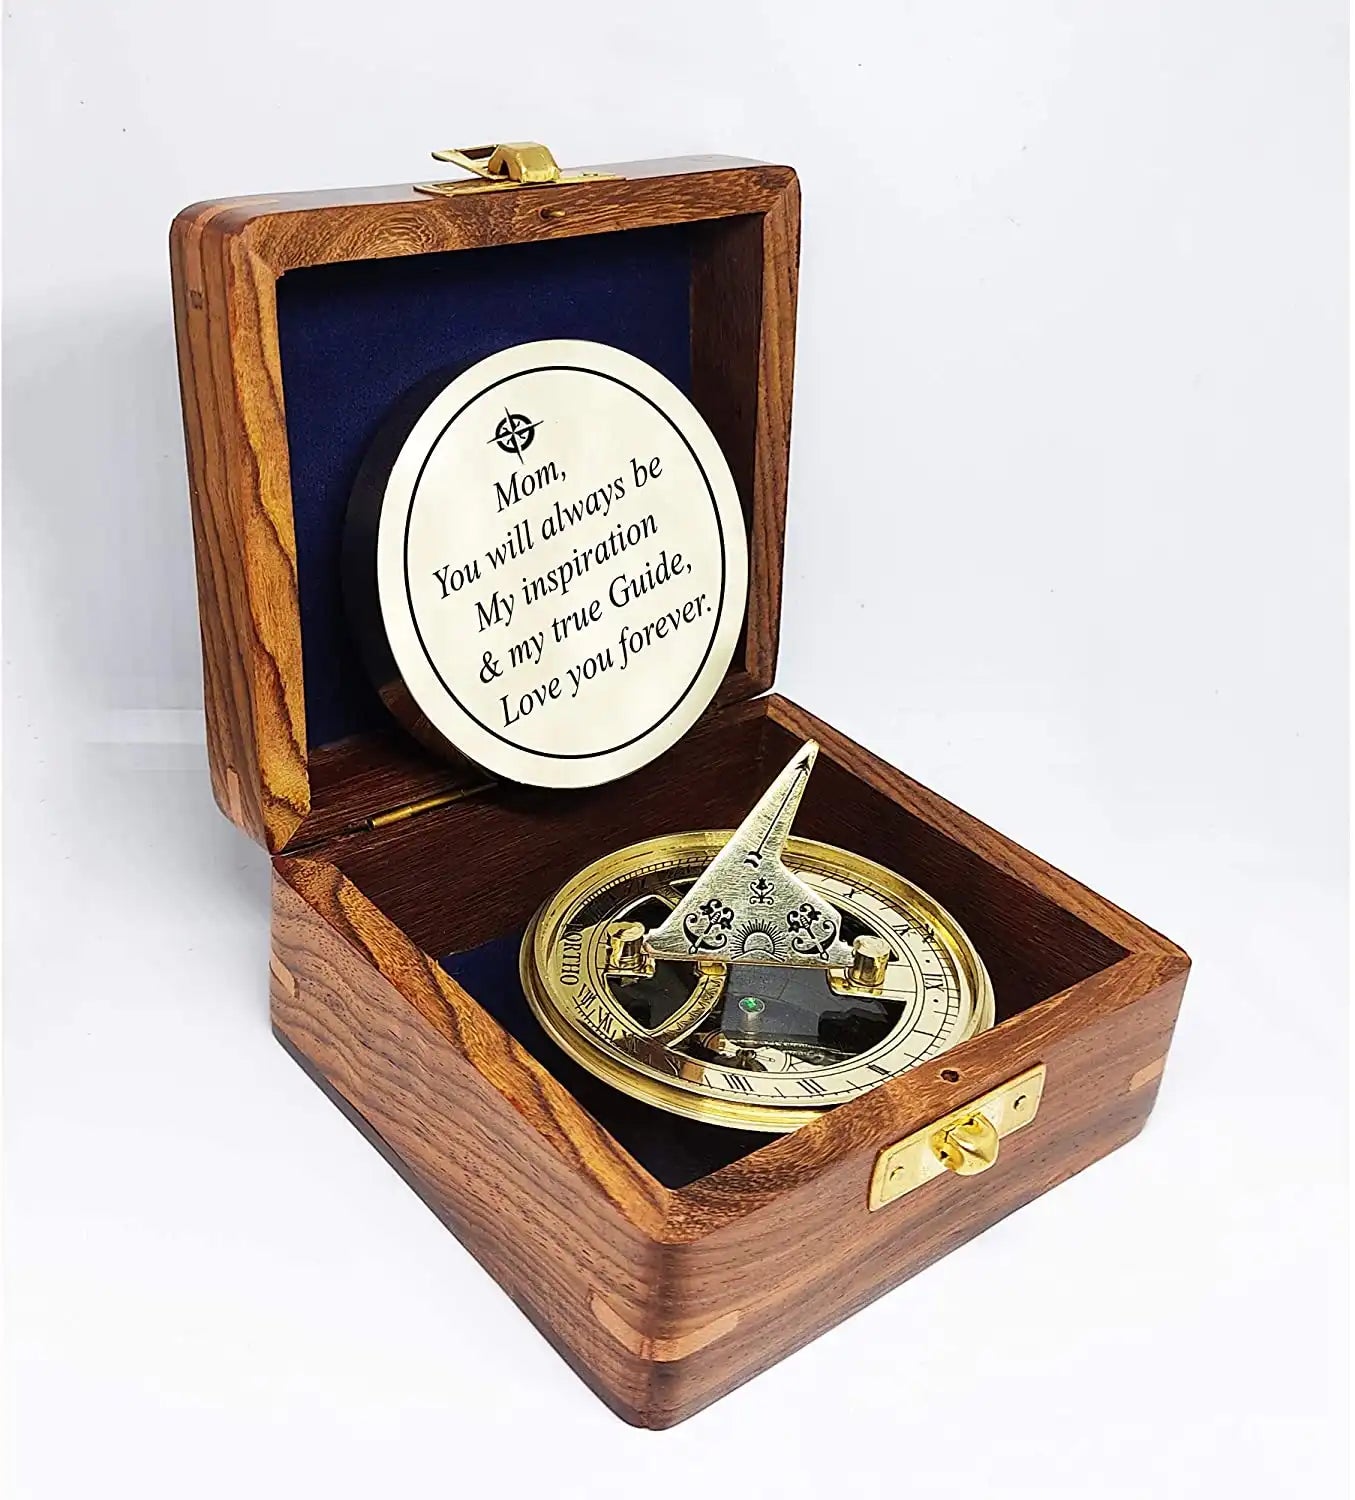 Engraved Sundial Compass with Wood Presentation Box for mom - Inspirational & Meaningful Gift for Mom from Children, Birthday Gift